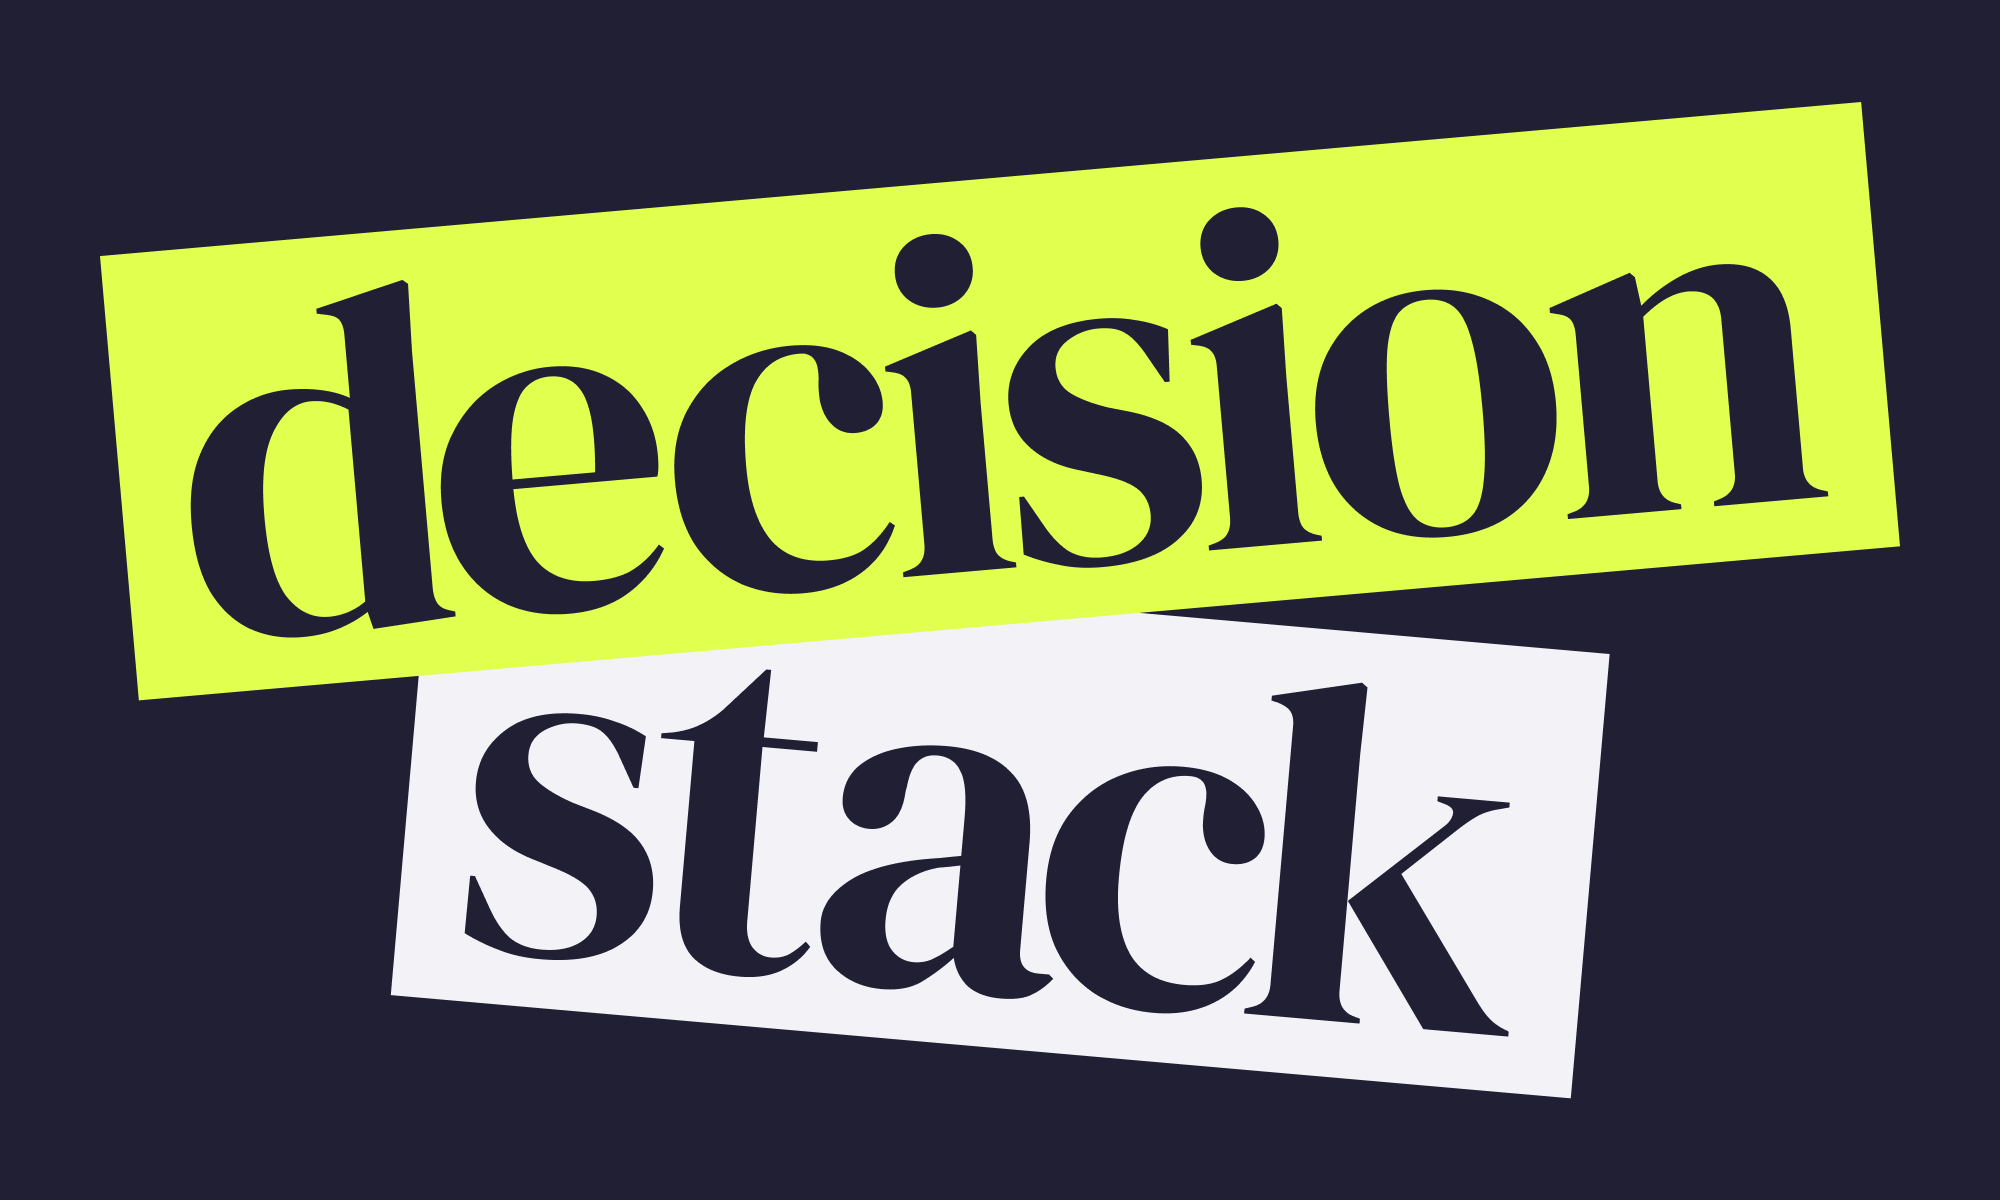 the Decision Stack